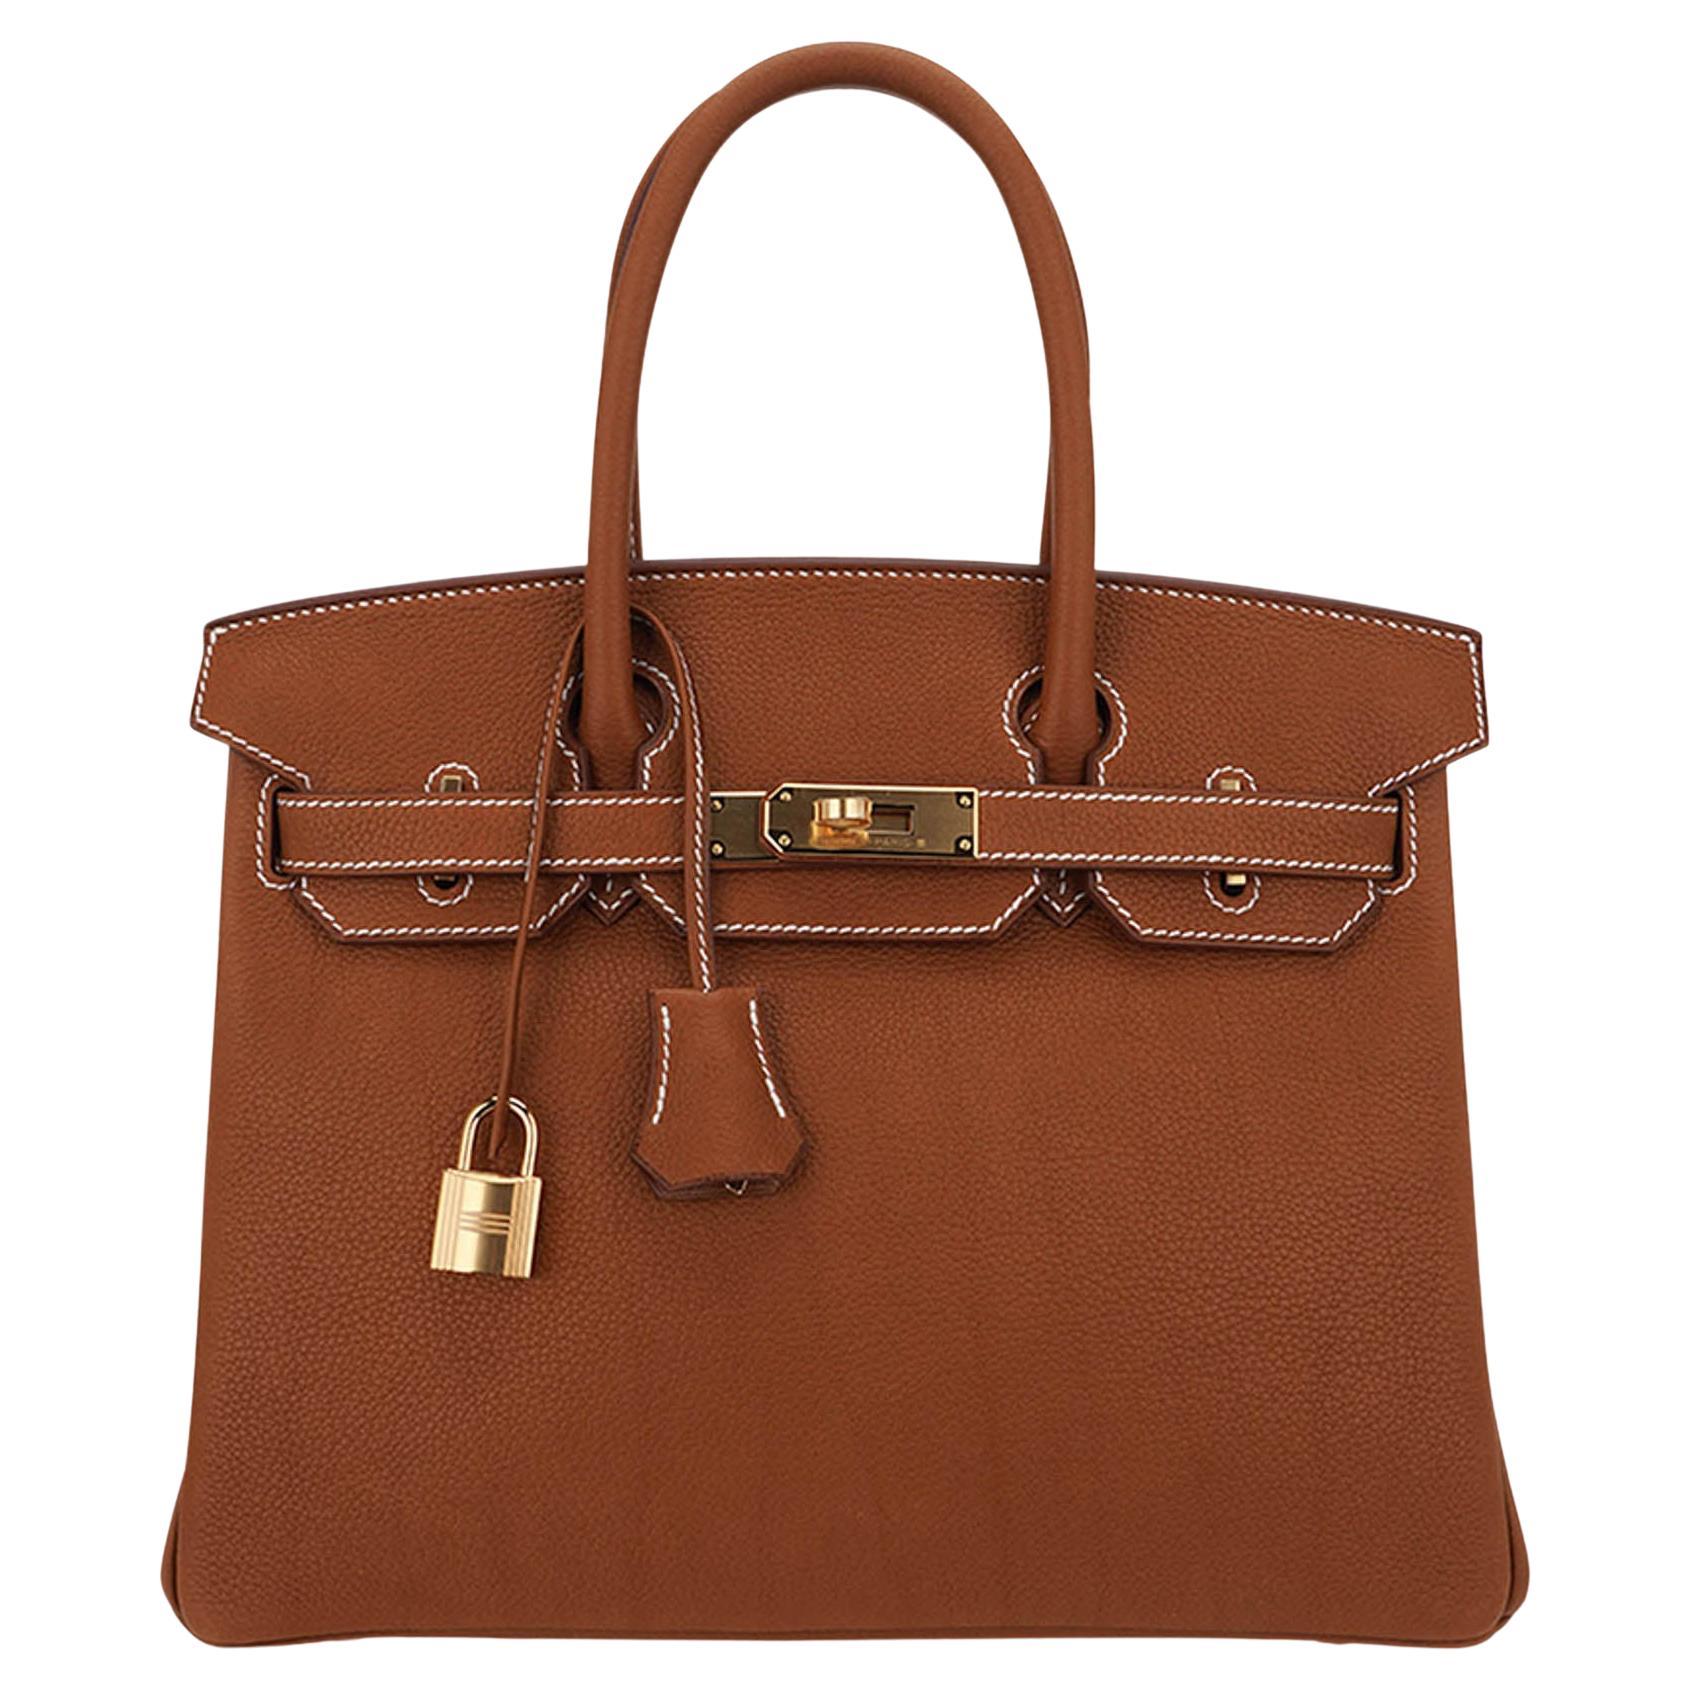 How much is a mini Birkin bag? - Questions & Answers